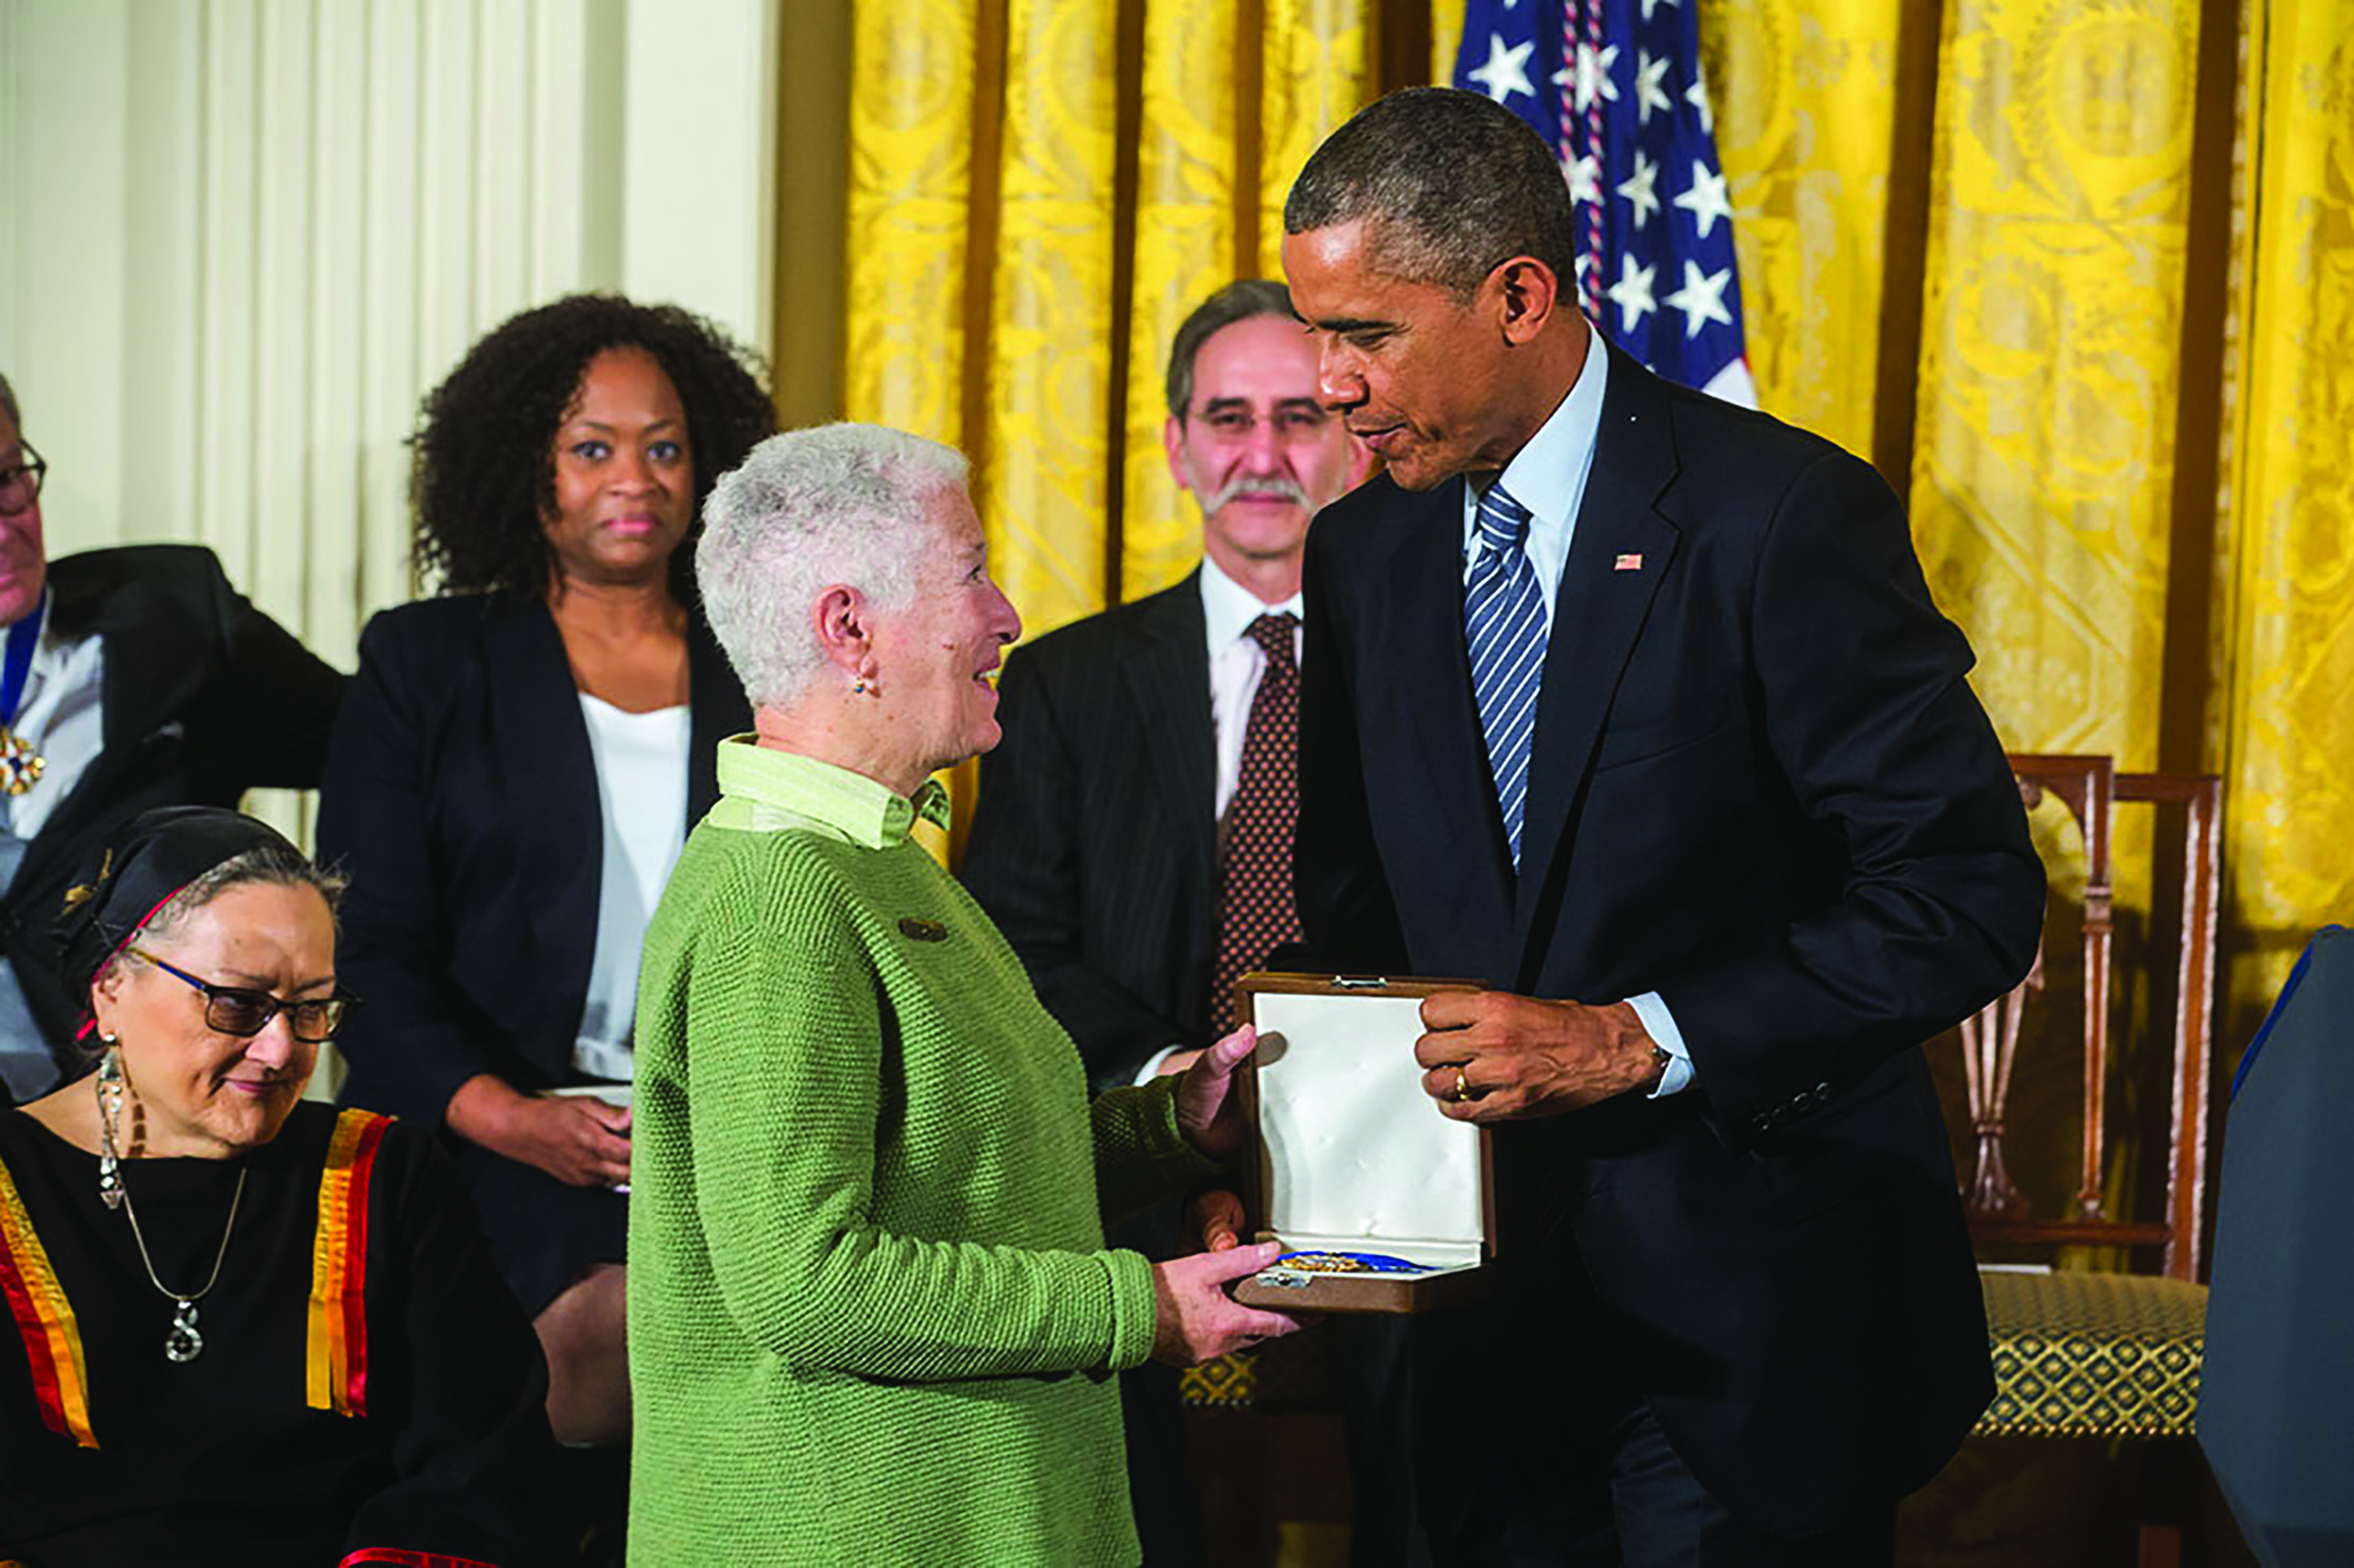 Presidential Medal of Freedom Awarded to Michael Schwerner, November 24, 2014. President Barack Obama presents the Presidential Medal of Freedom posthumously to civil rights activists James Chaney, Andrew Goodman and Michael Schwerner during a ceremony in the East Room of the White House. The awards were accepted by relatives of the civil rights activists. Official White House Photo By Chuck Kennedy.